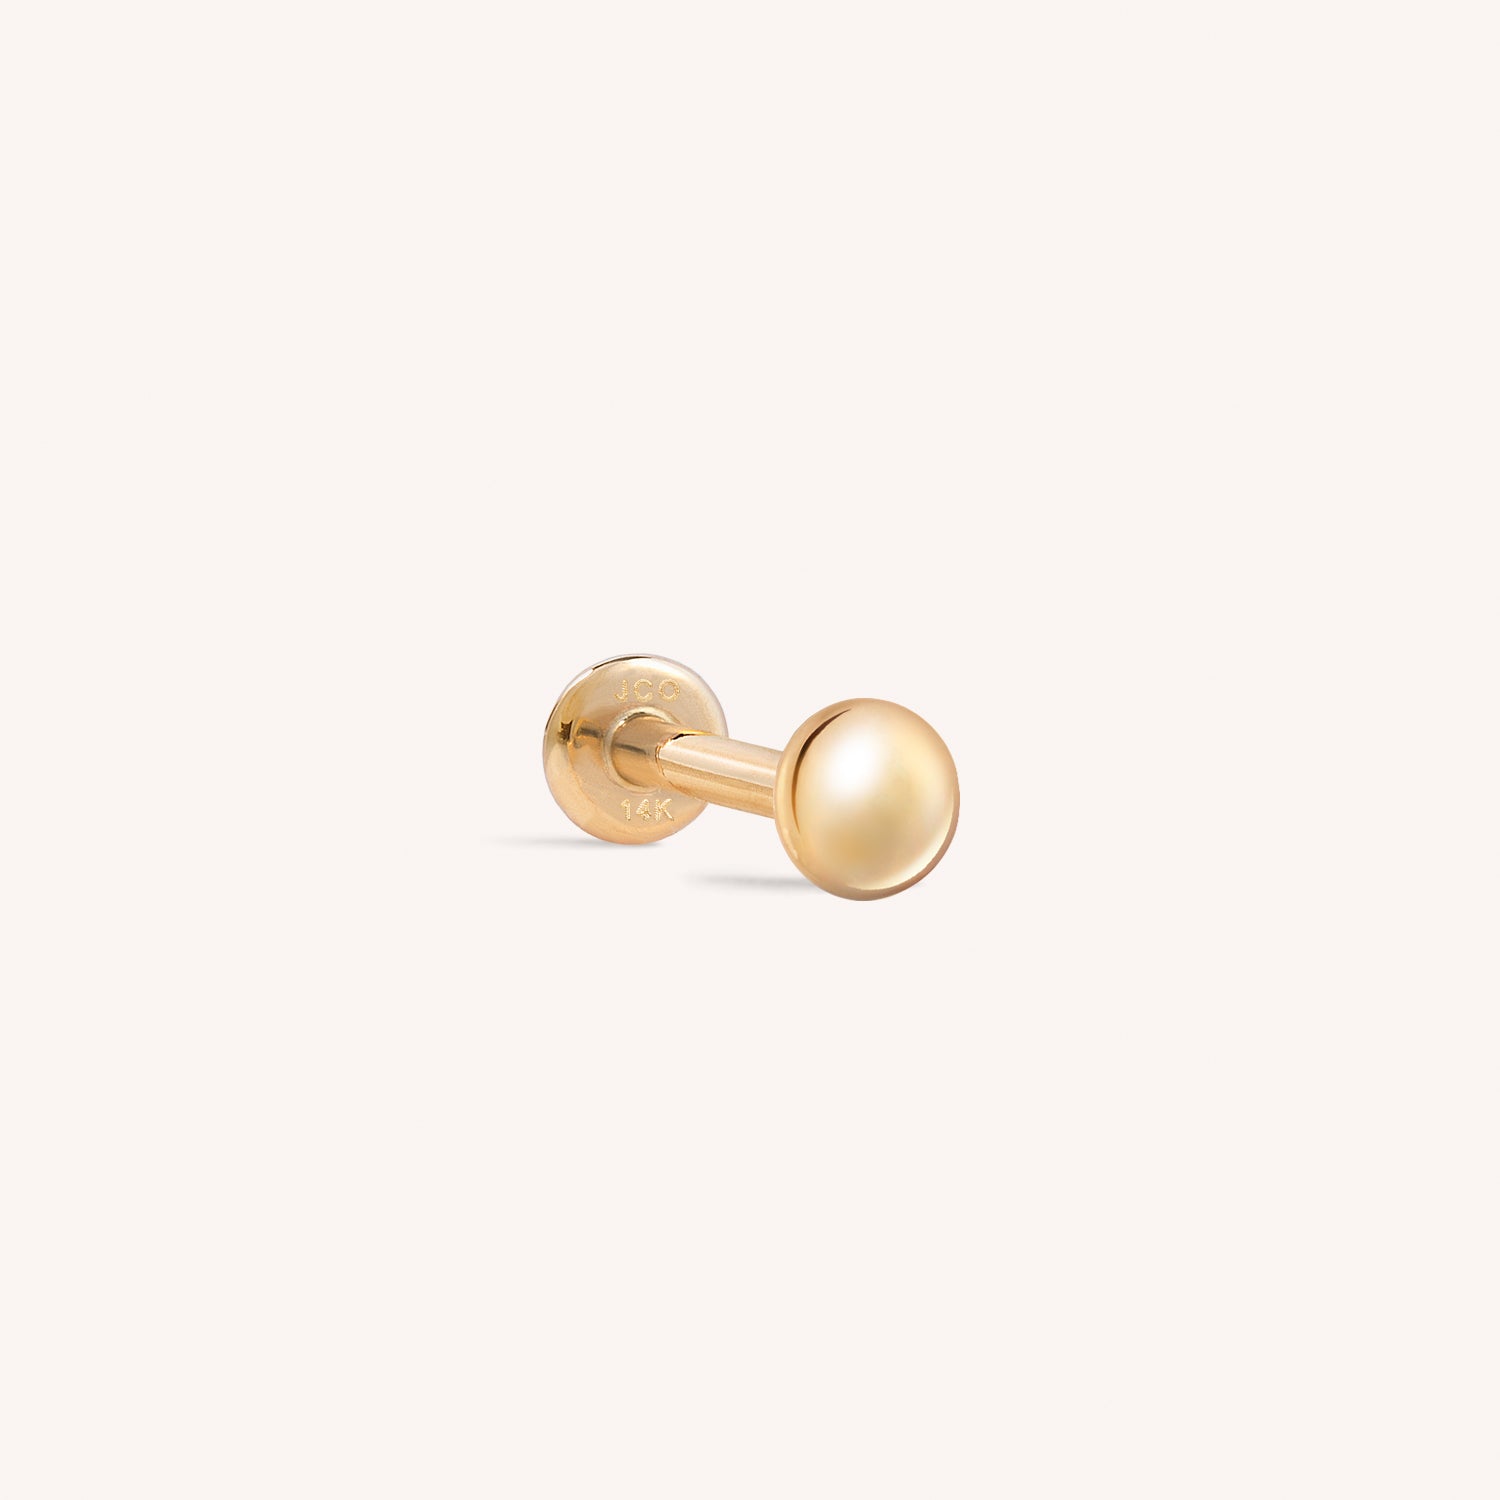 Hypoallergenic 14k Gold Flat Back Stud Earrings With 2mm 4mm Tiny